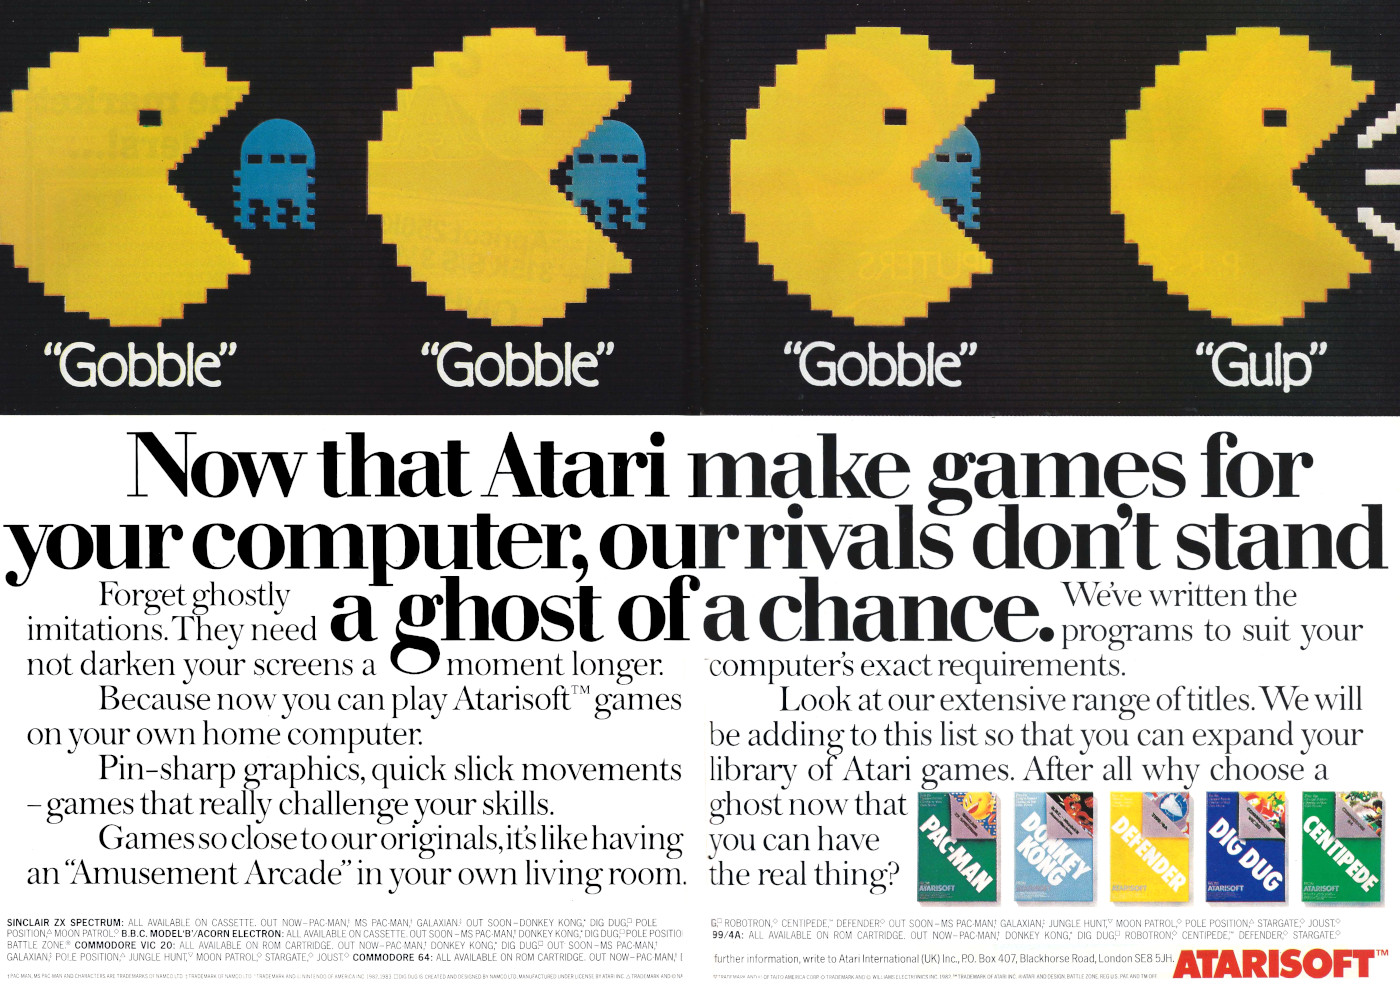 An advert from Atarisoft, which features a dig at clones of the company's games, like Commodore's version of <span class='hilite'>Pac-Man</span>, which it called Jelly Monsters after legal pressure from Atari. From Personal Computer World, March 1984